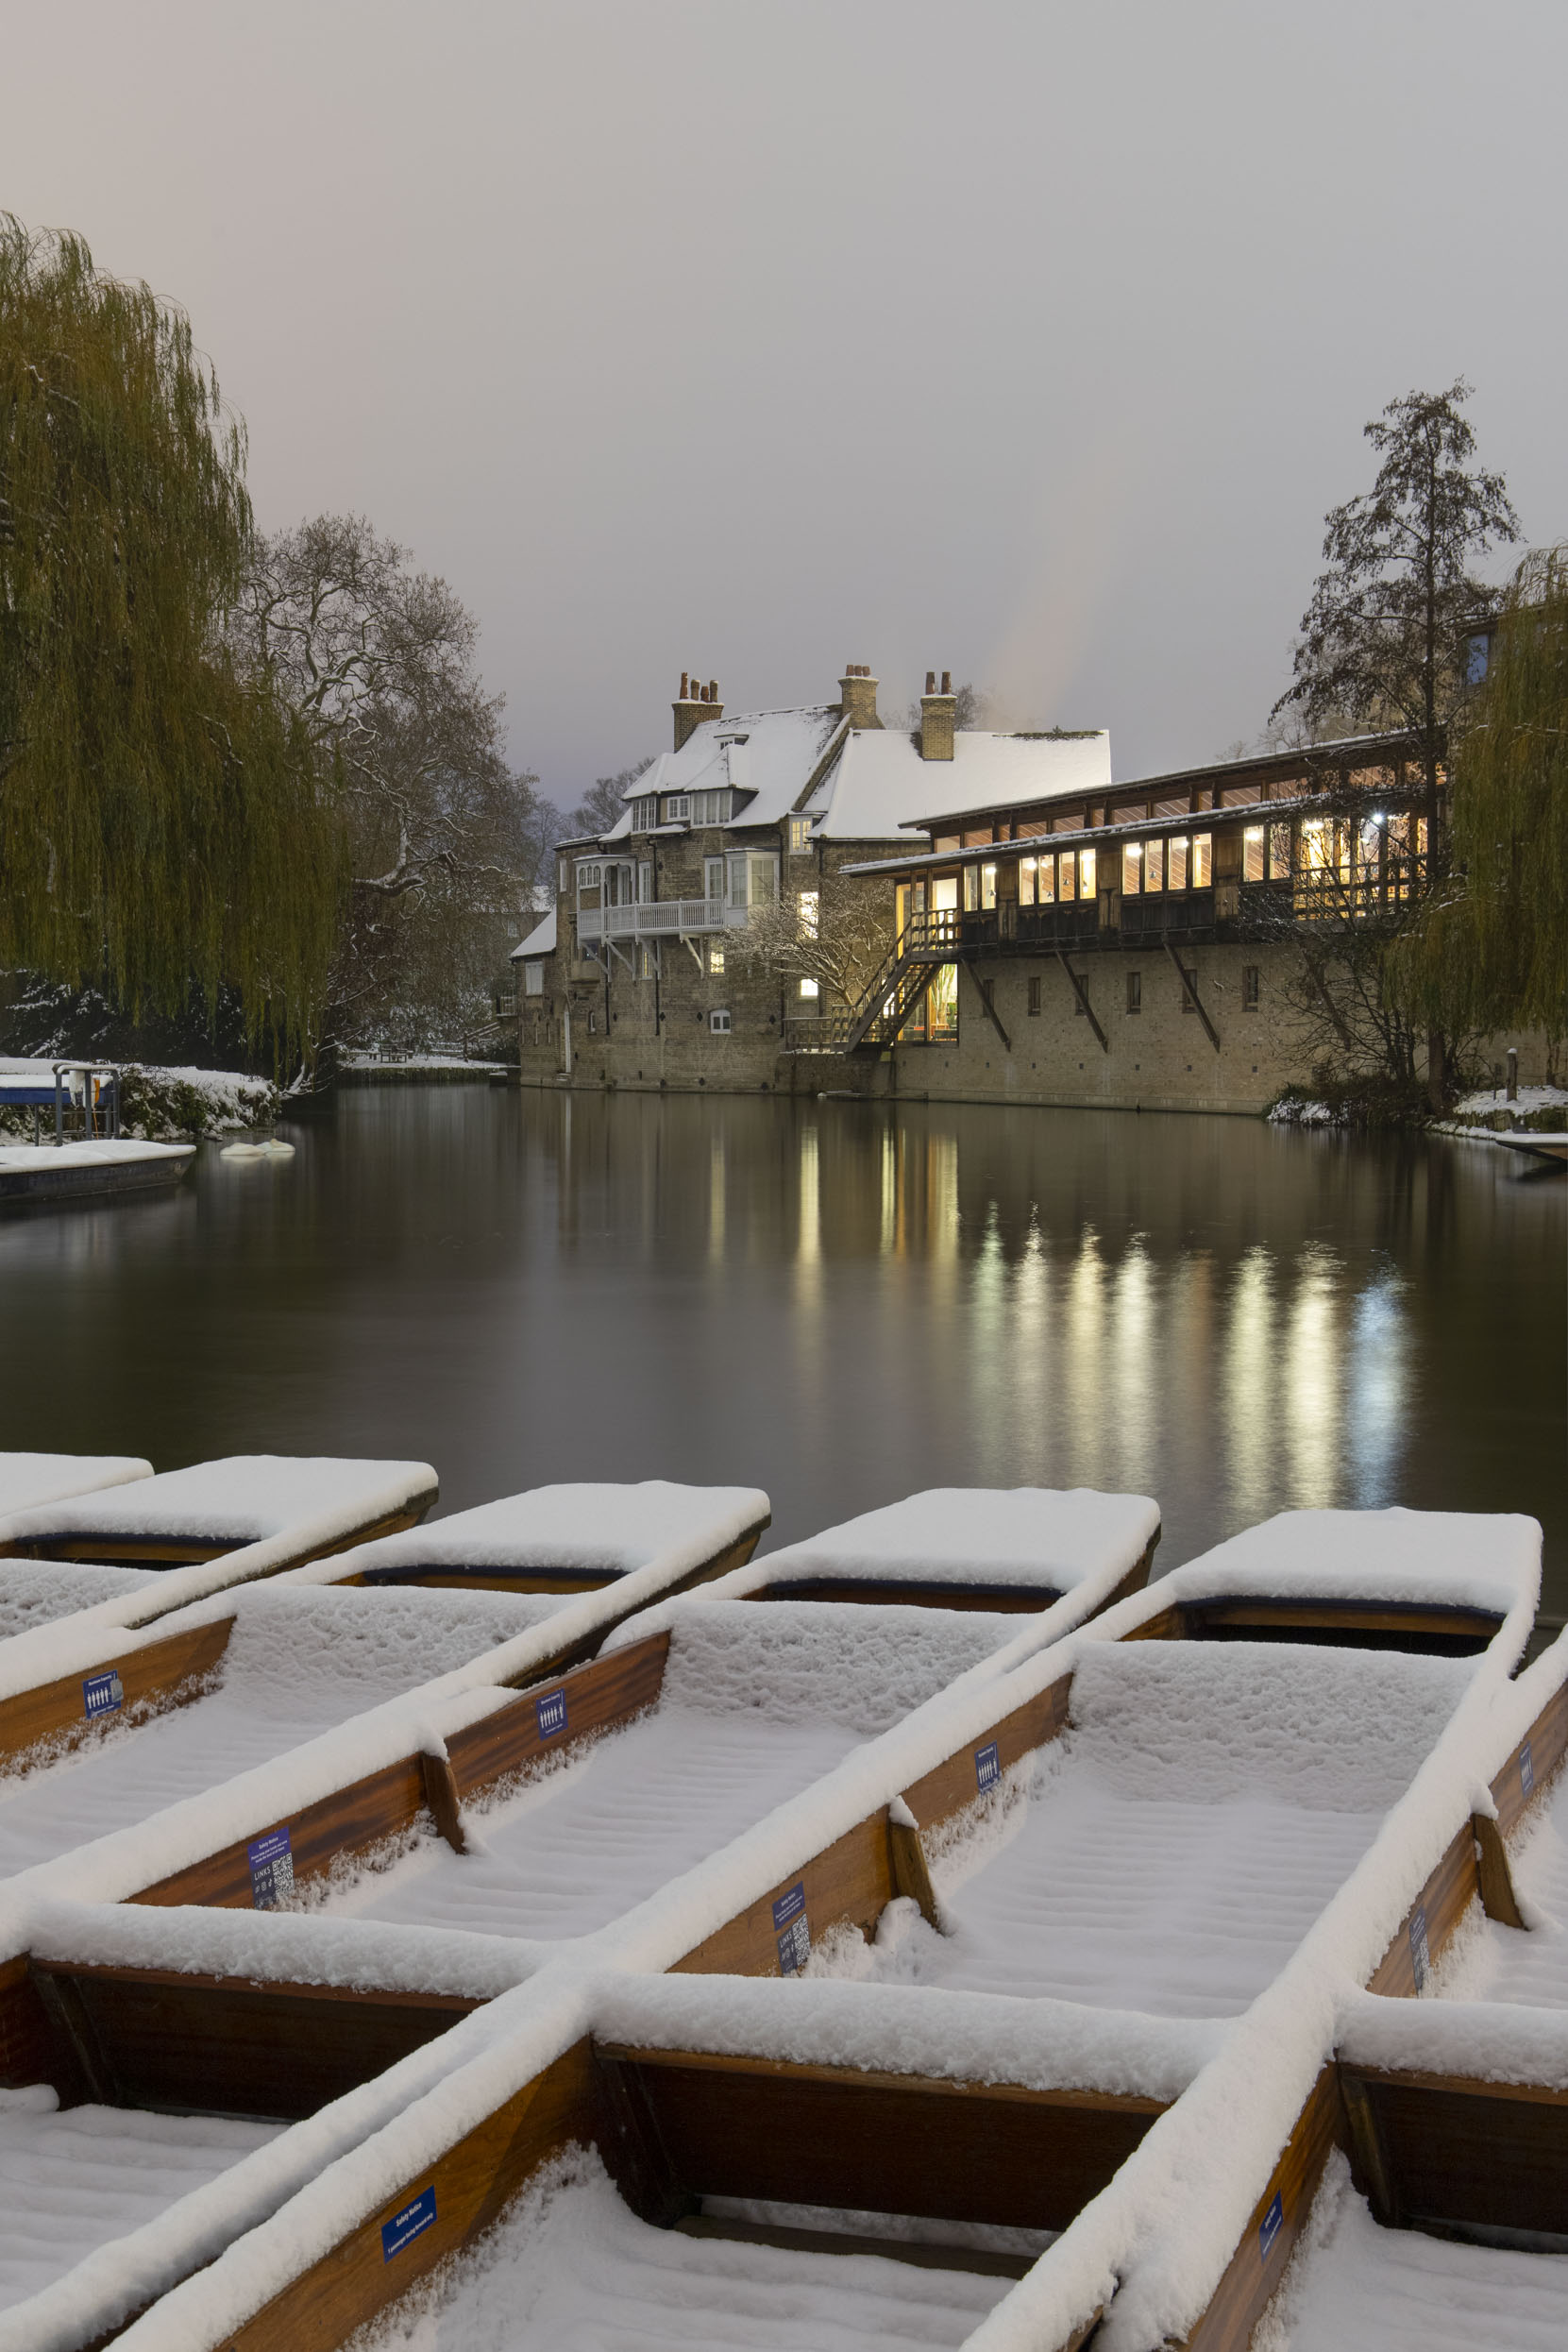 A rare snowy day in Cambridge in December 2022. Darwin college seen behind the Scudamore punts.